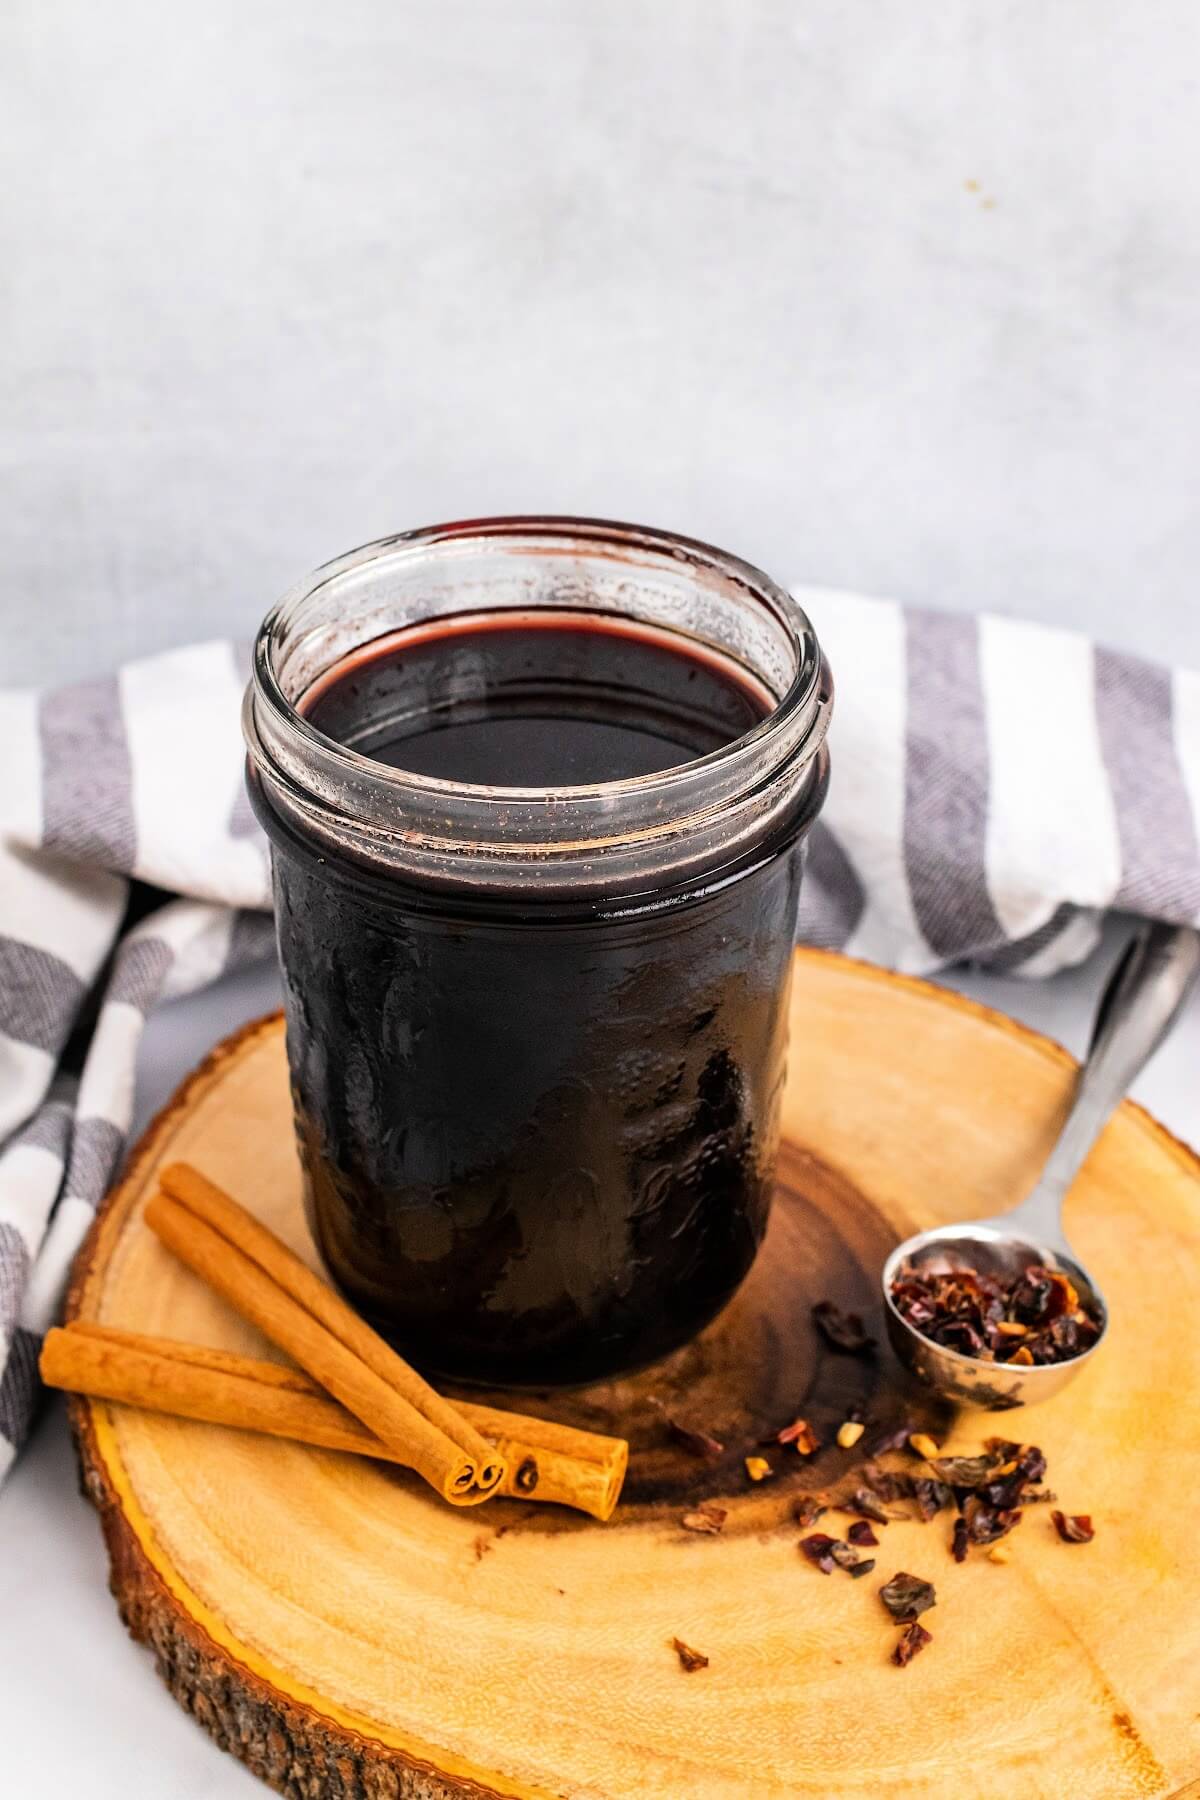 Mason jar filled with dark purple syrup, sitting on top of a wood tree slab circle cutting board, next to cinnamon sticks and a spoon full of dried rose hips with a cloth kitchen towel behind it.